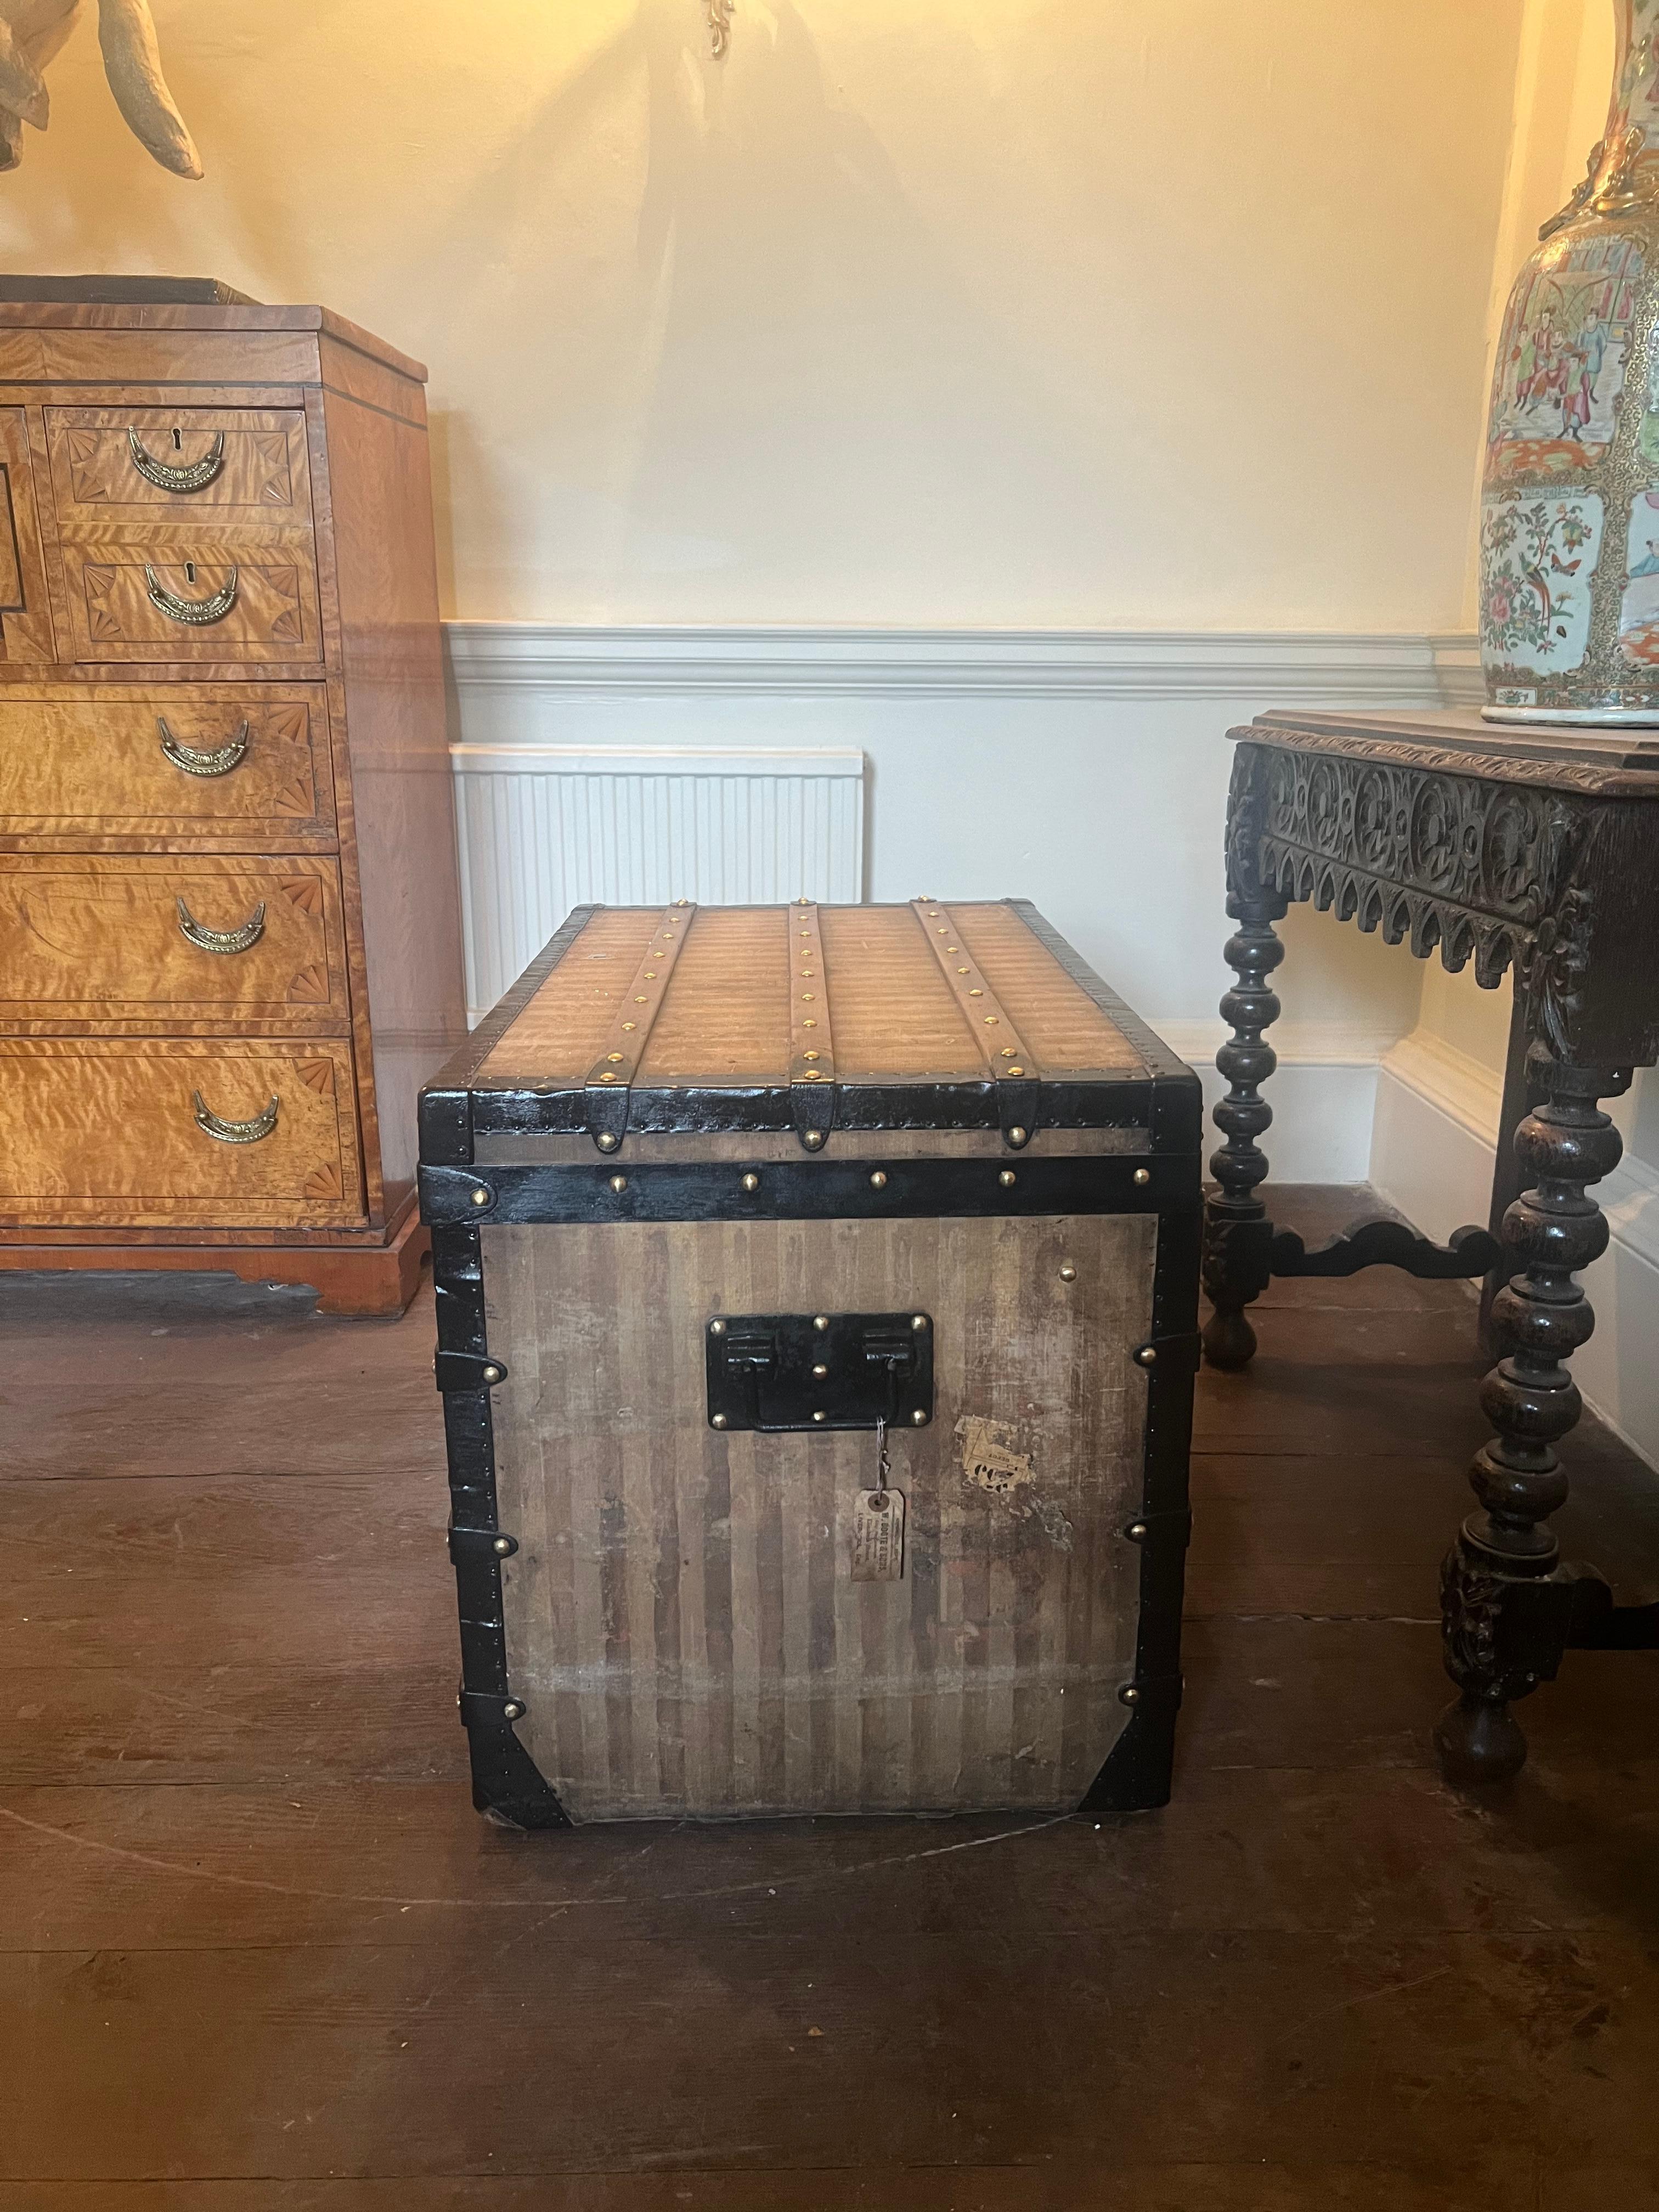 Louis Vuitton Rayèe Steamer Trunk In Good Condition For Sale In Moreton-In-Marsh, GB